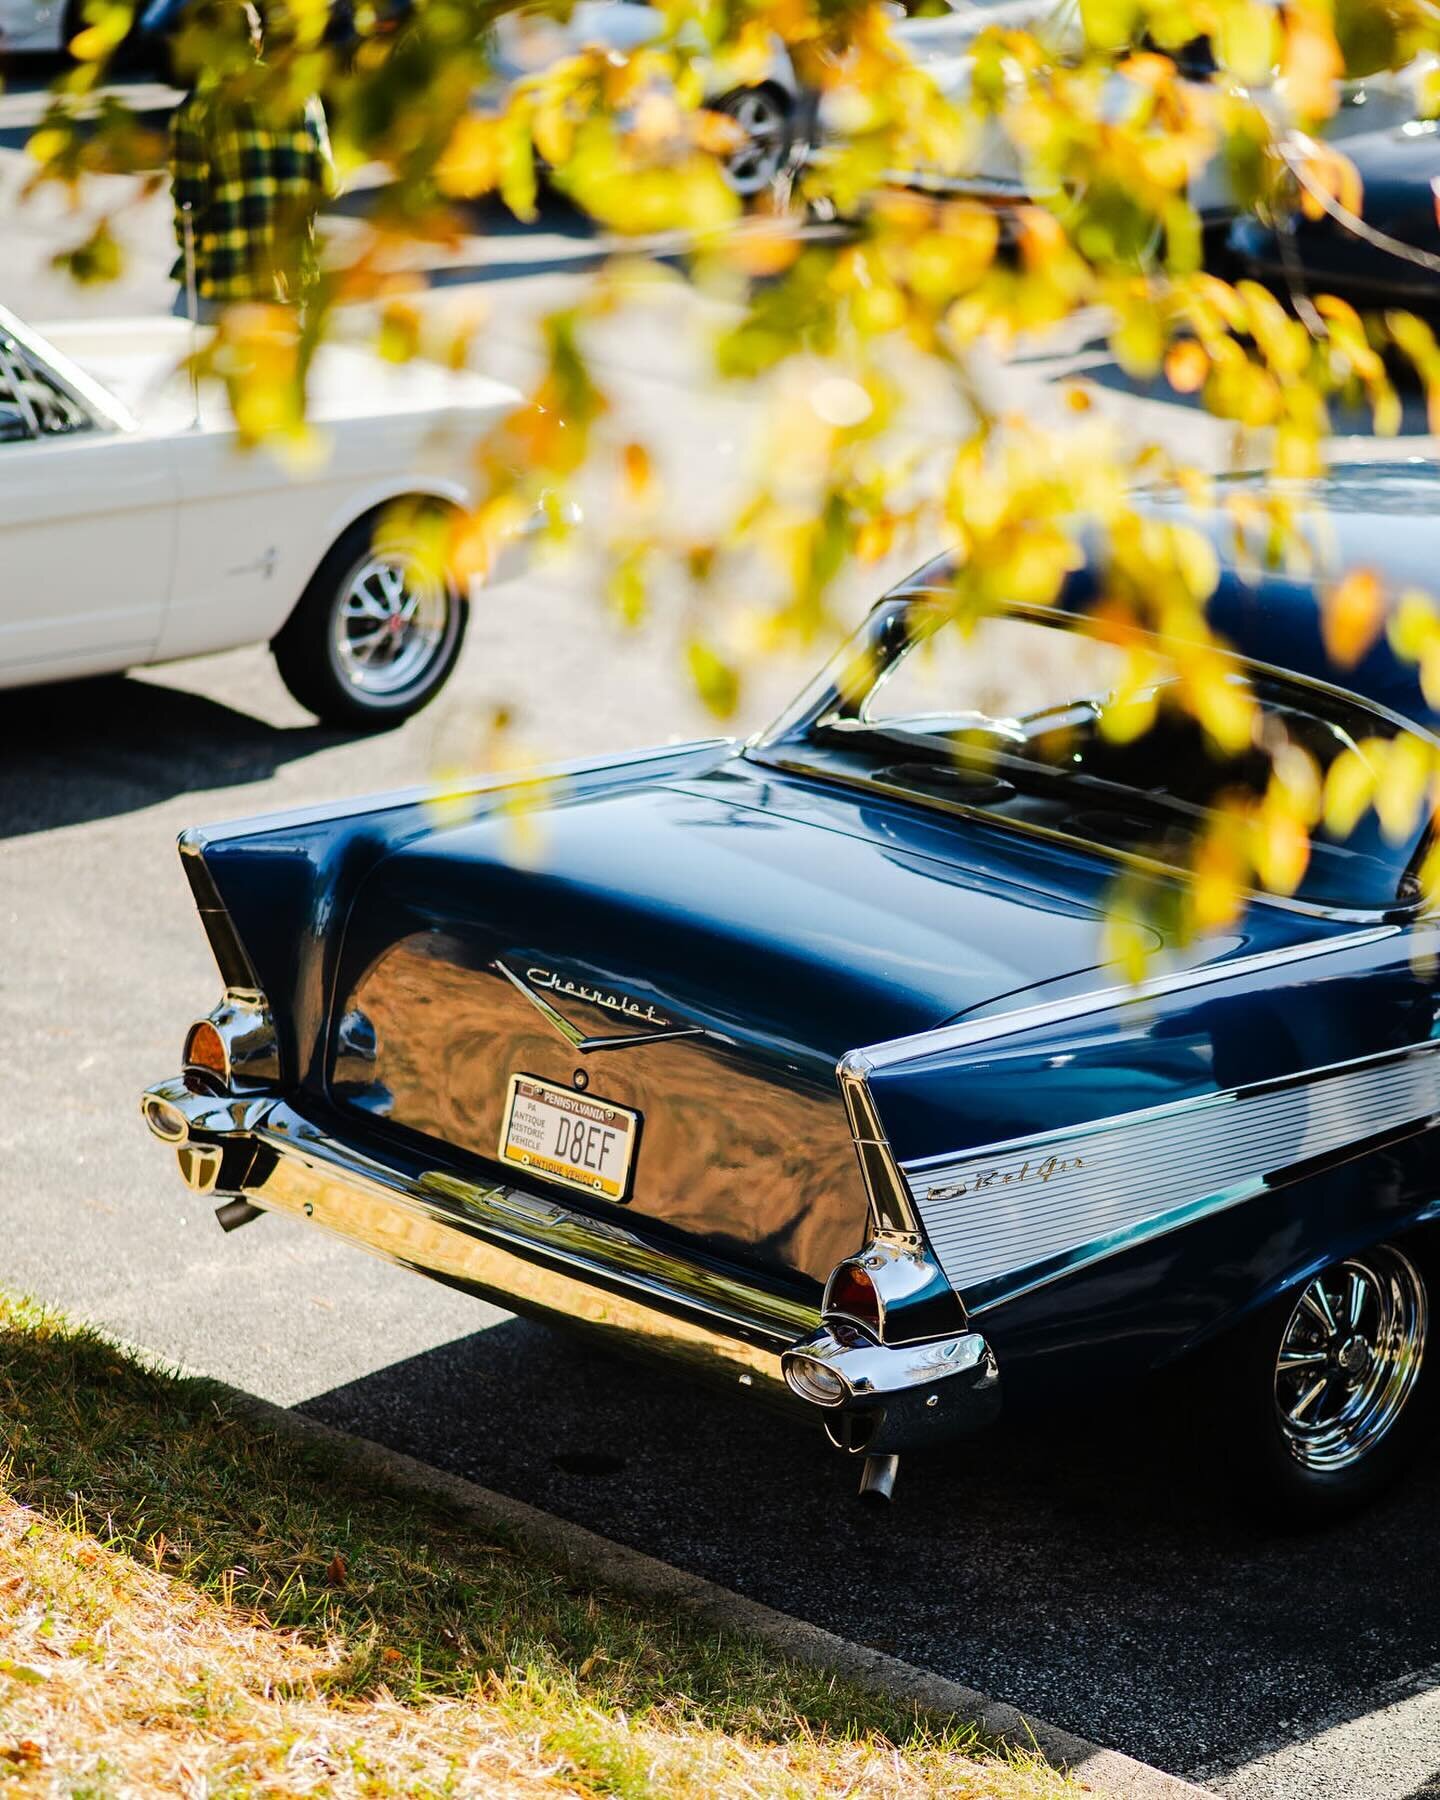 The old, the new, and some fall colors 🍂🚗🏎️ thanks for hosting, @mainline_carsandcoffee 

#carspotting #carsandcoffee #carsandtrees #carsdaily #carspotter #carsinstagram #cargasm #carsofig #carseat #carshow #carscene #cars247 #autophoto